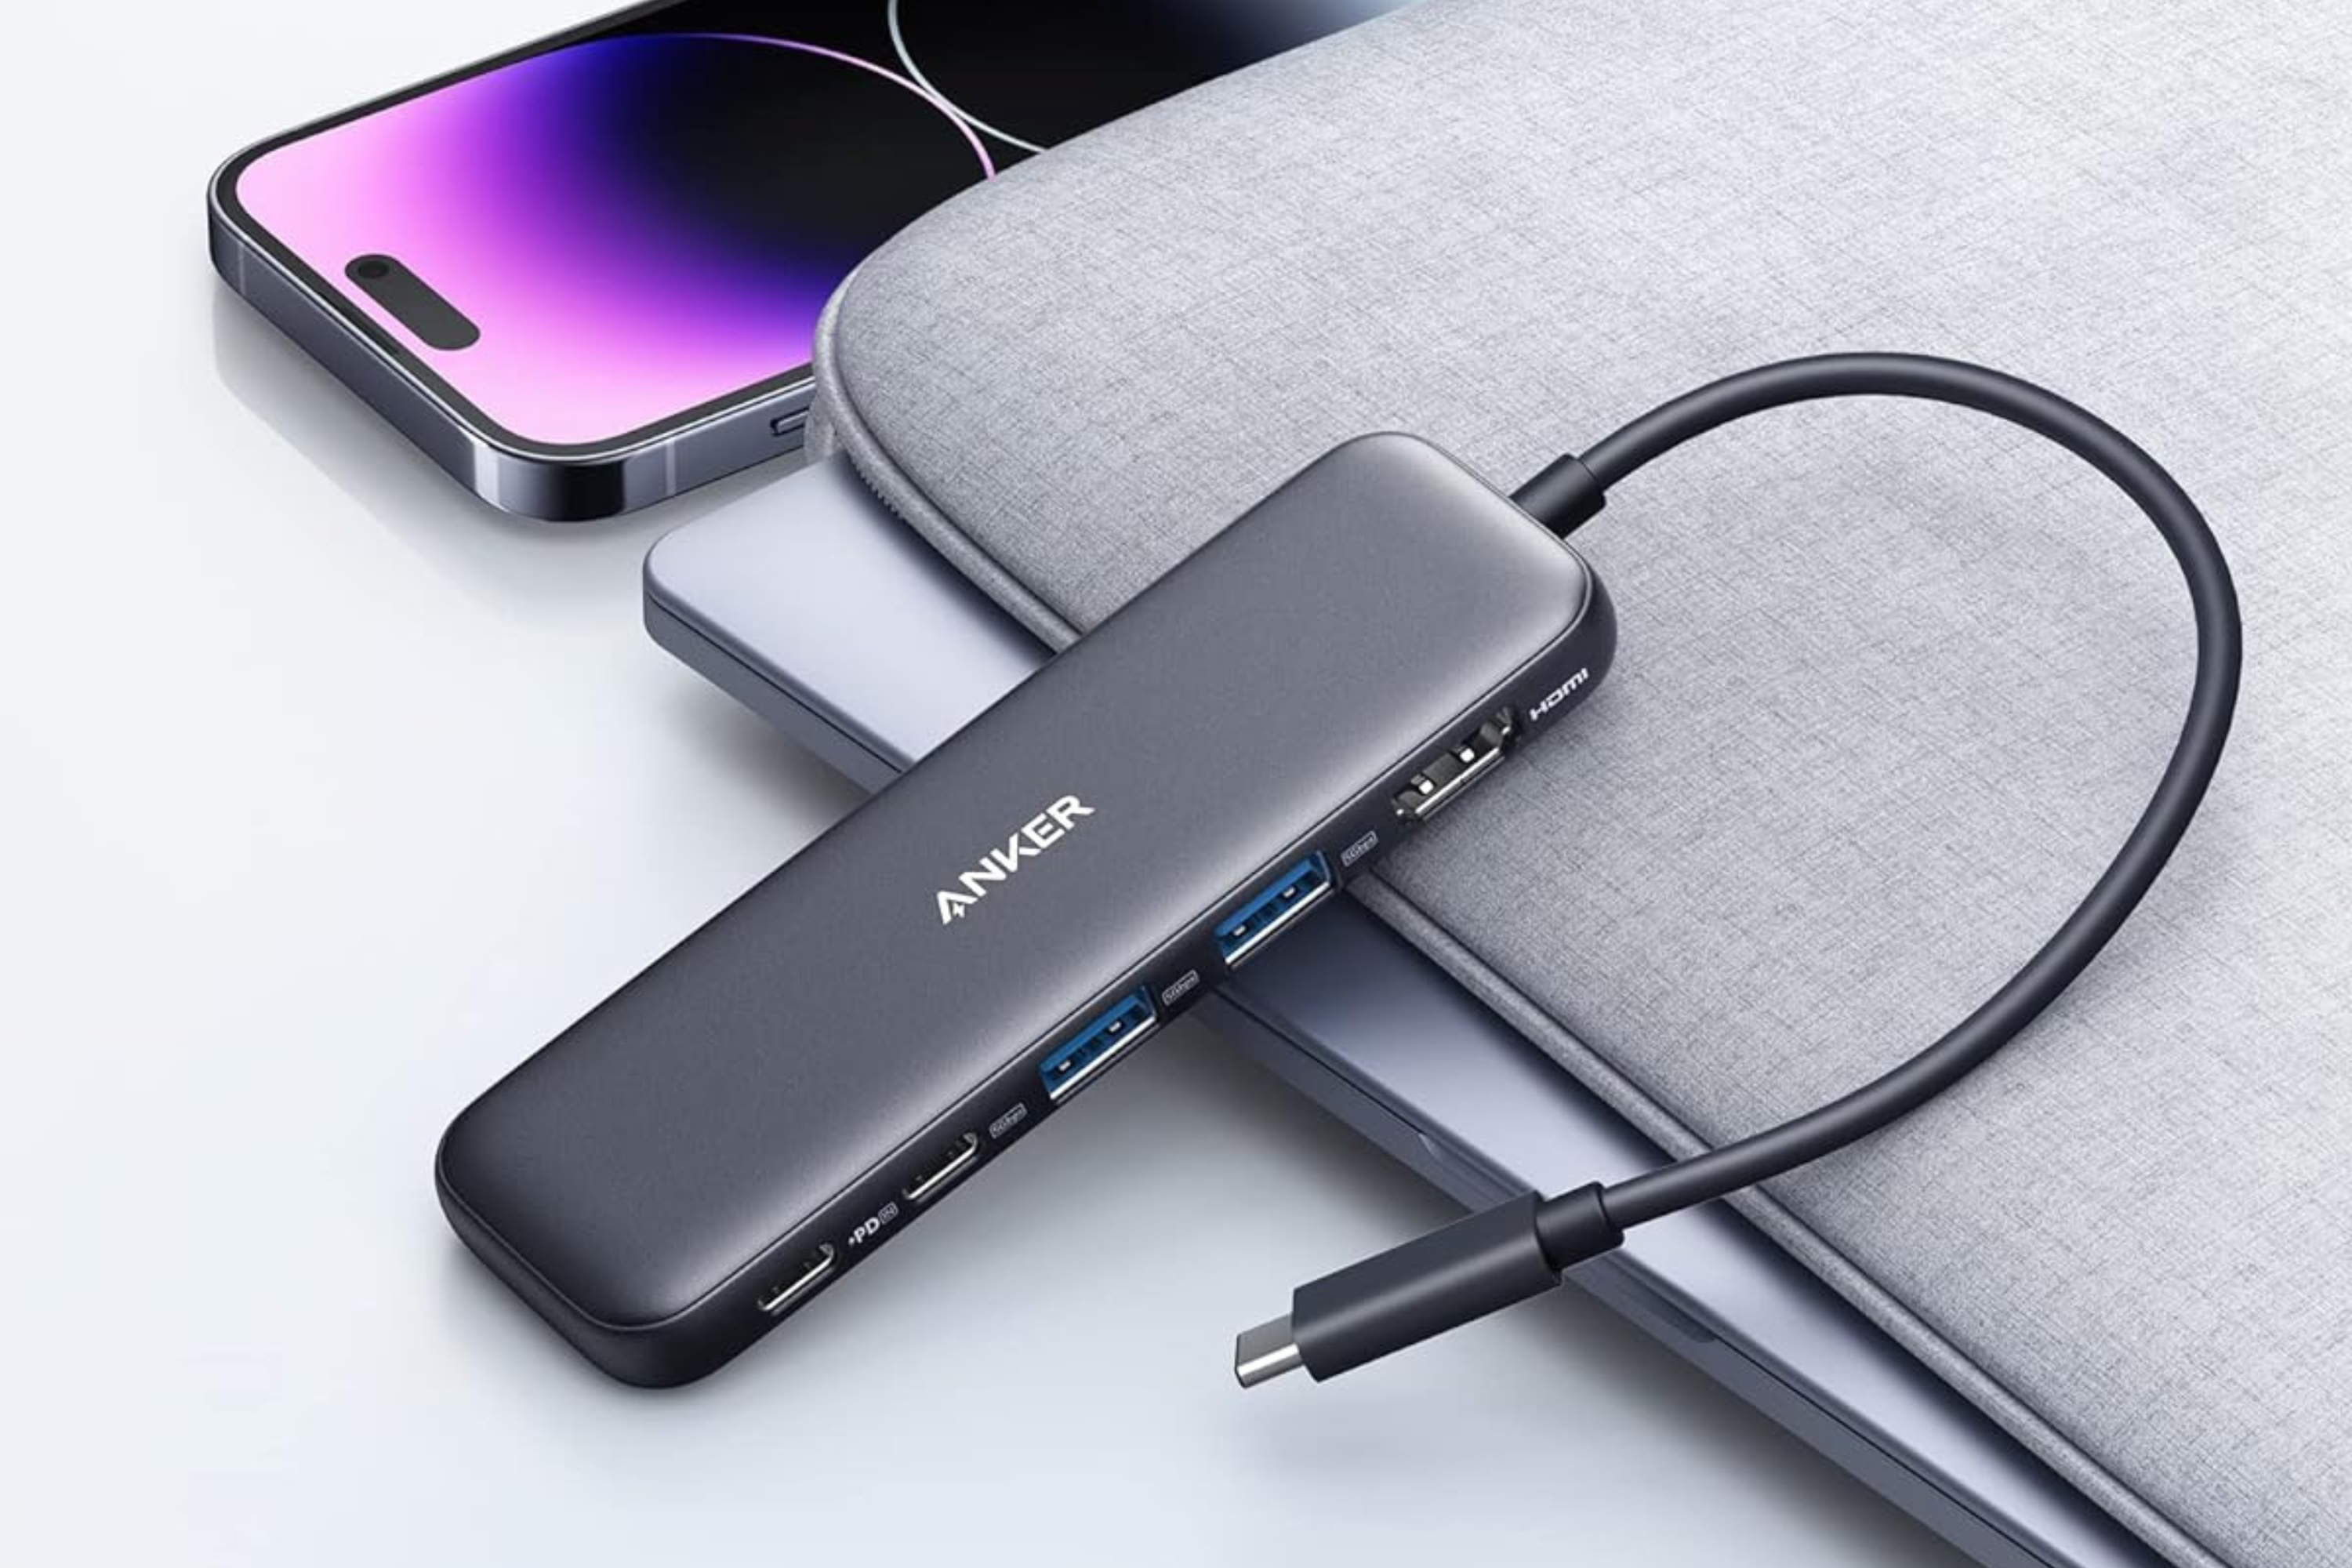 Anker 332 USB-C Hub on top of laptop next to smartphone